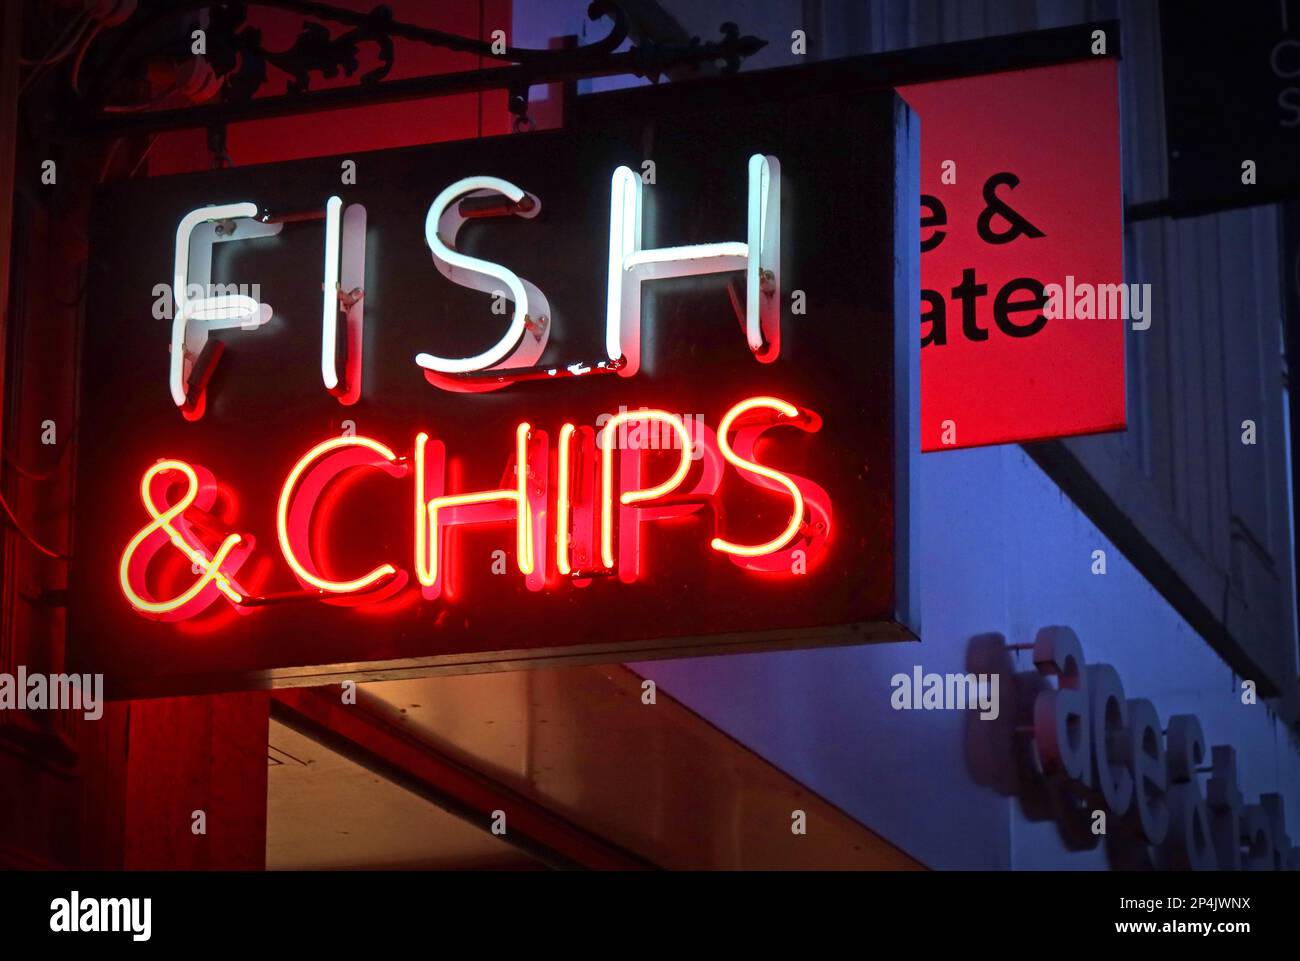 Frying tonight - British traditional food, the favourite fried Fish & Chips, neon sign, Bold Street, Liverpool, Merseyside, England, UK Stock Photo